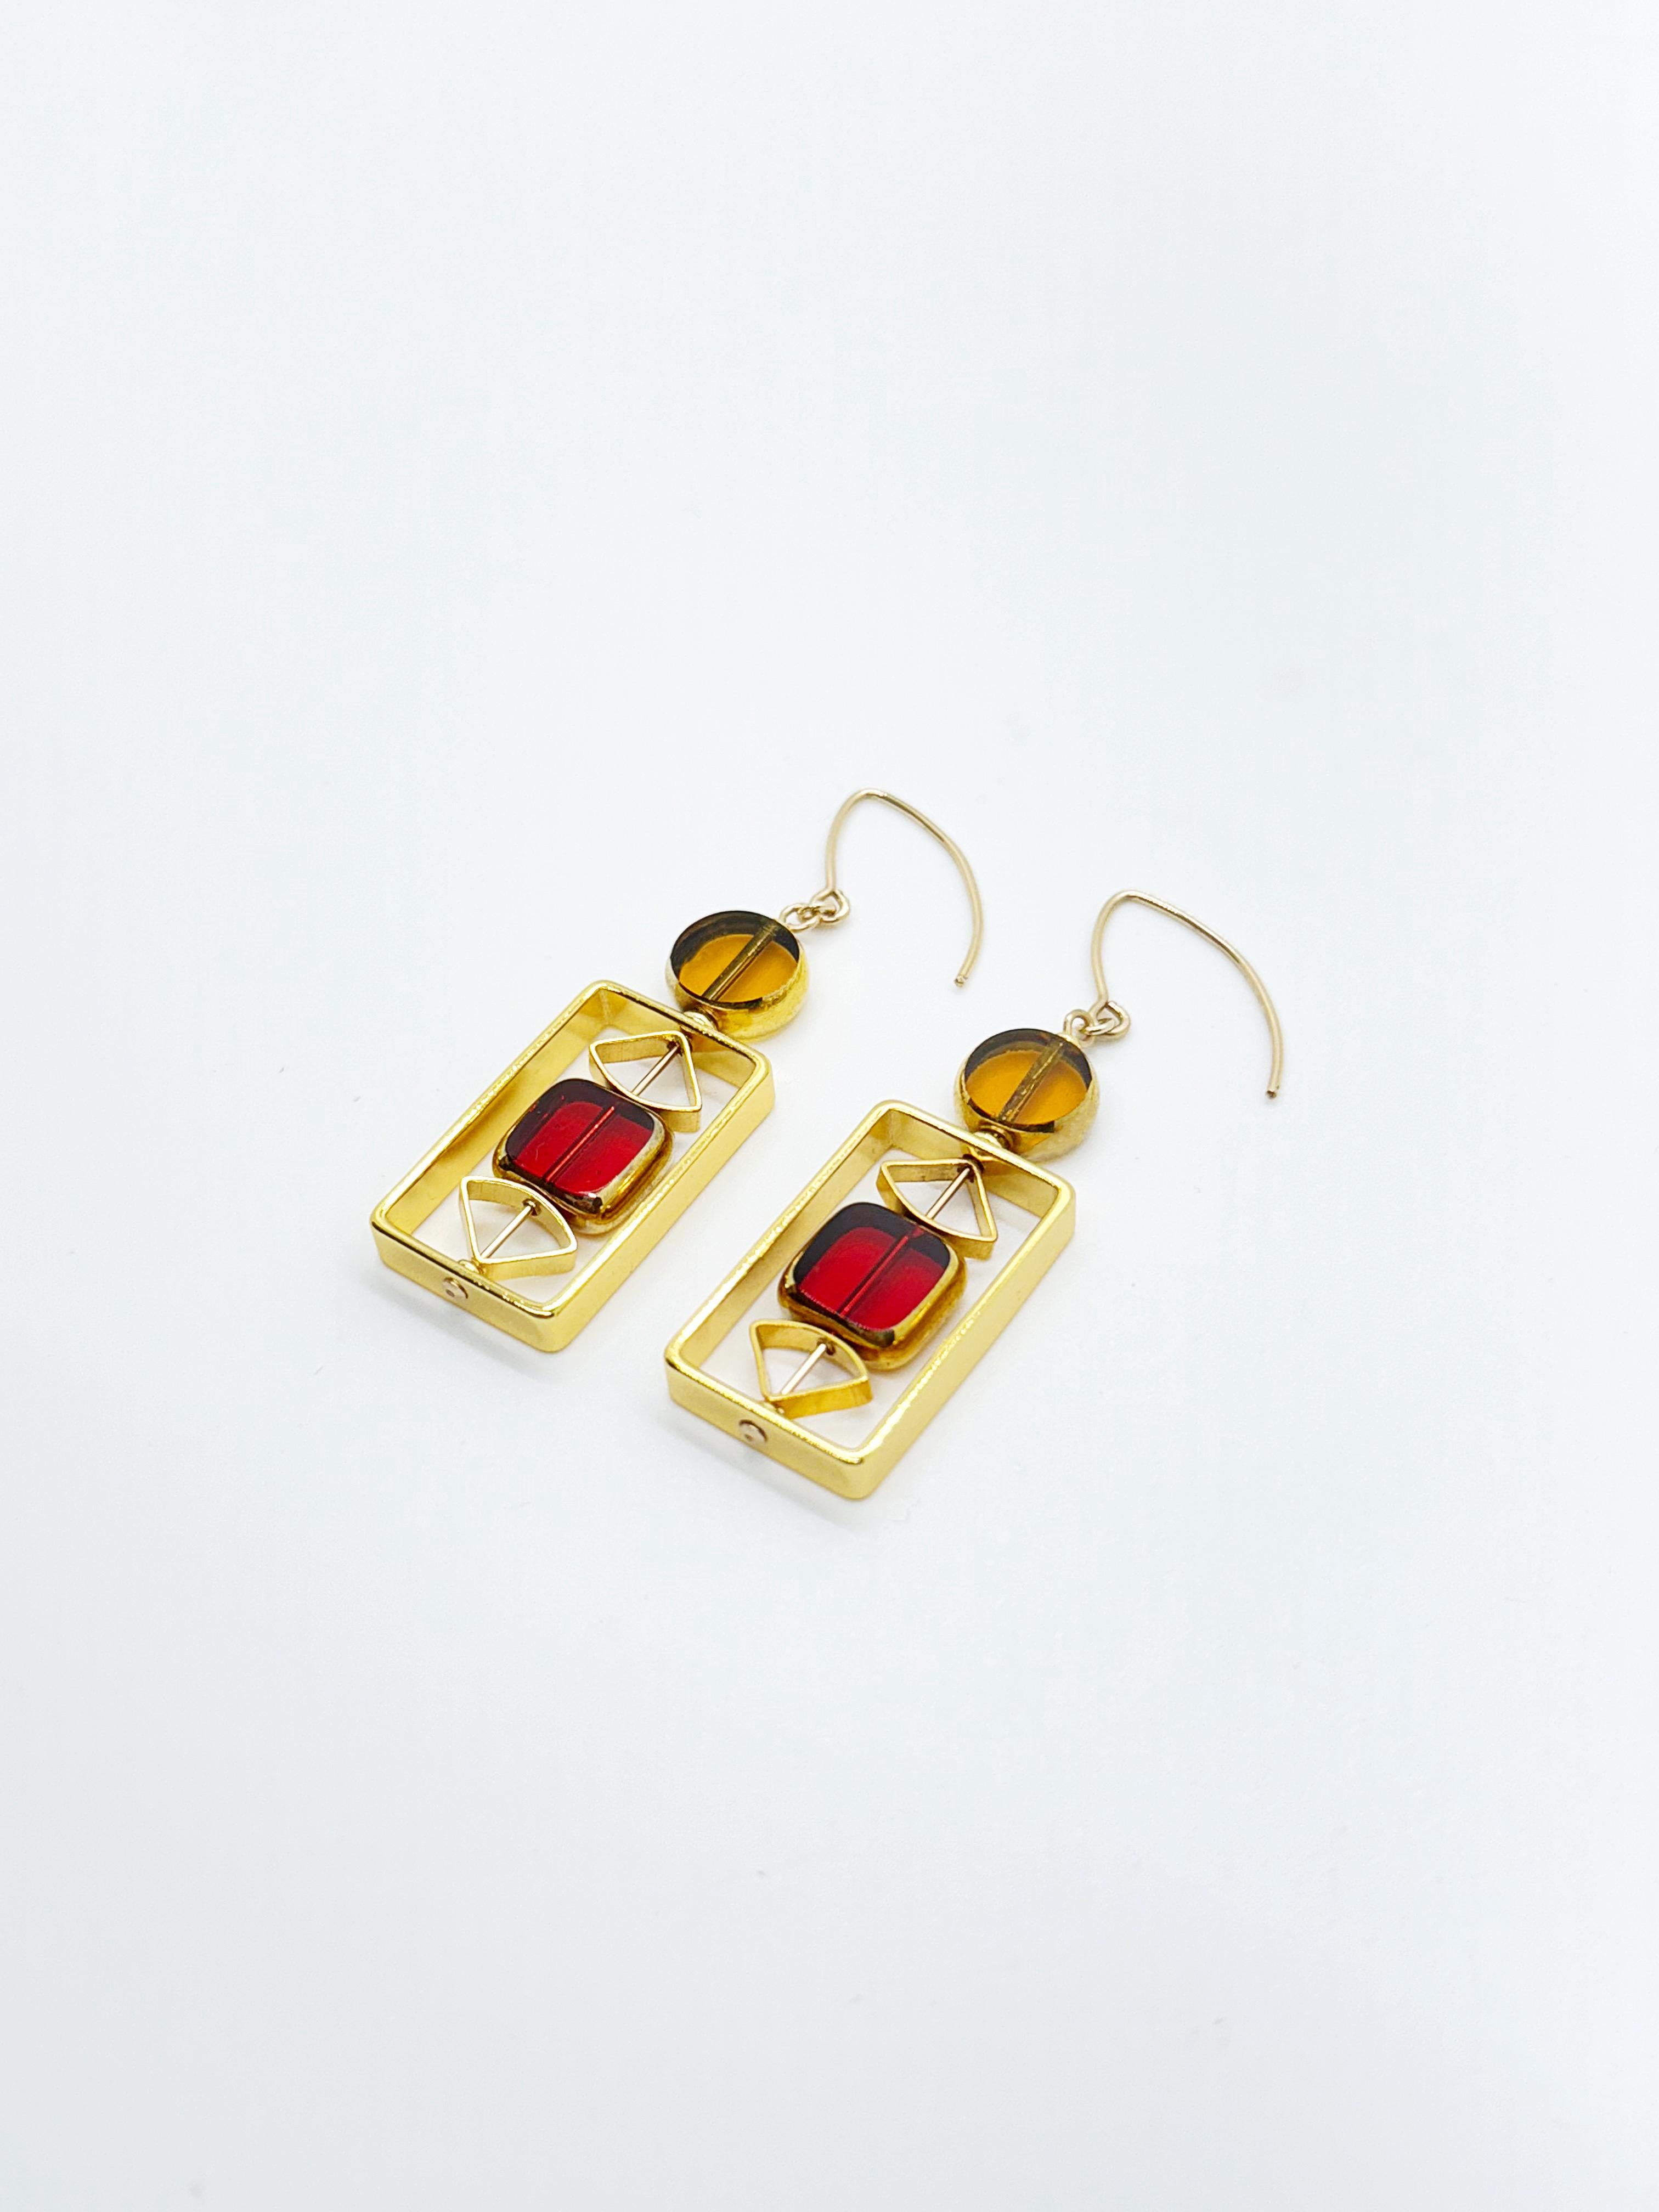 Translucent Yellow And Red Vintage German Glass Beads Art Deco 2415E Earrings In New Condition For Sale In Monrovia, CA